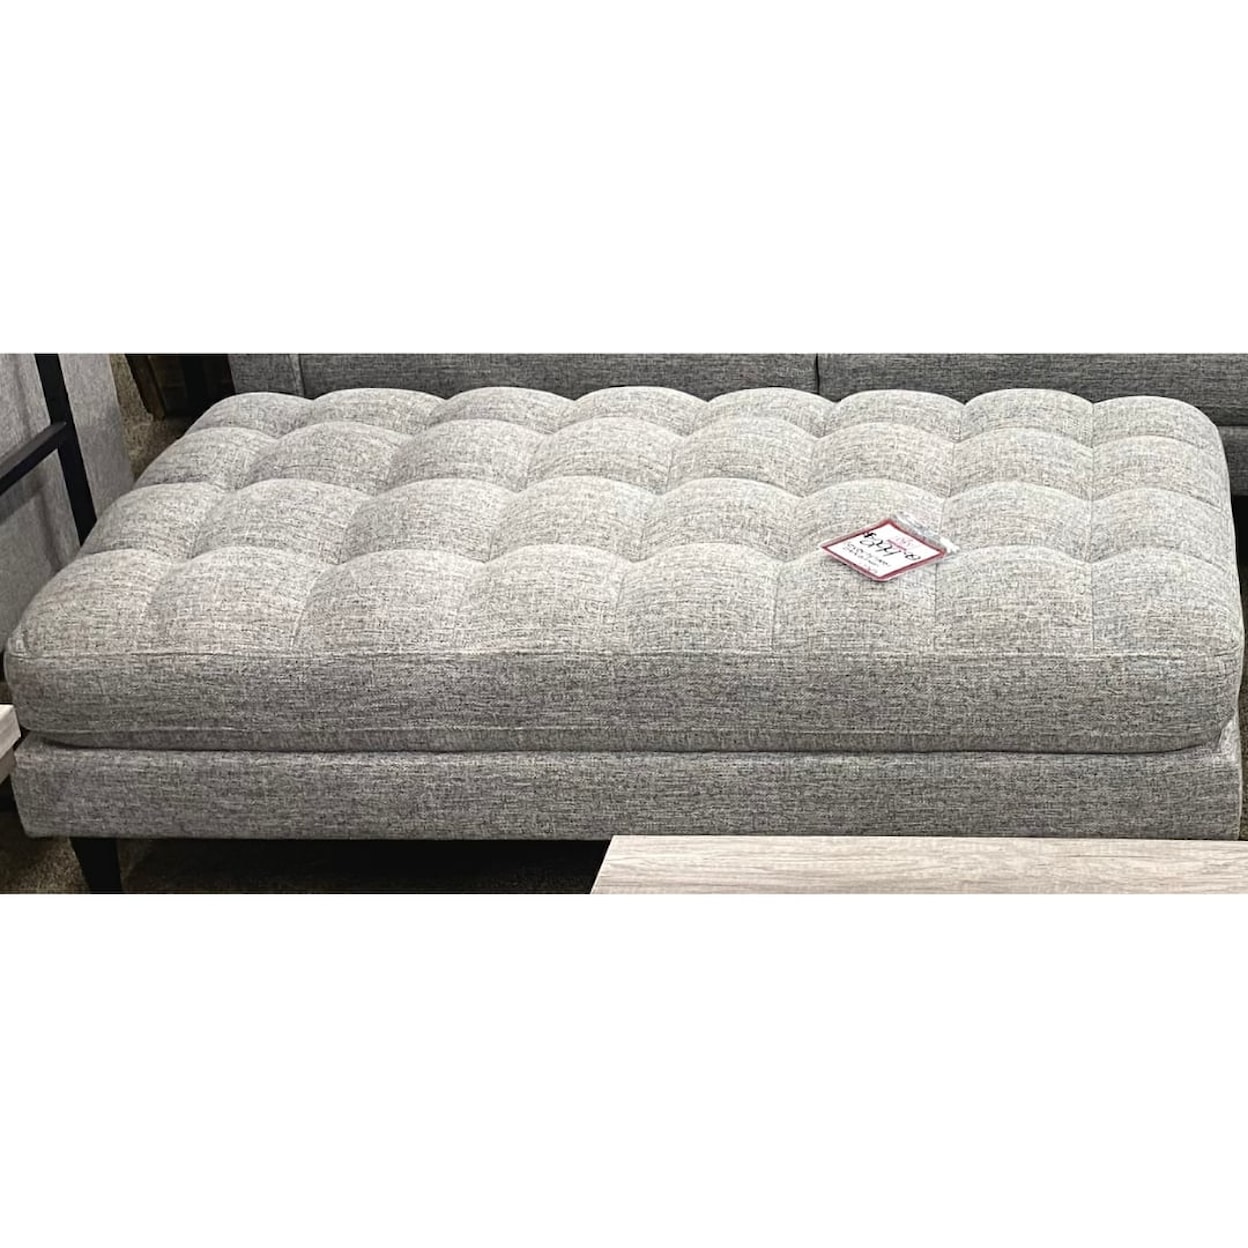 Lifestyle Beverly BEVERLY STEEL OTTOMAN |